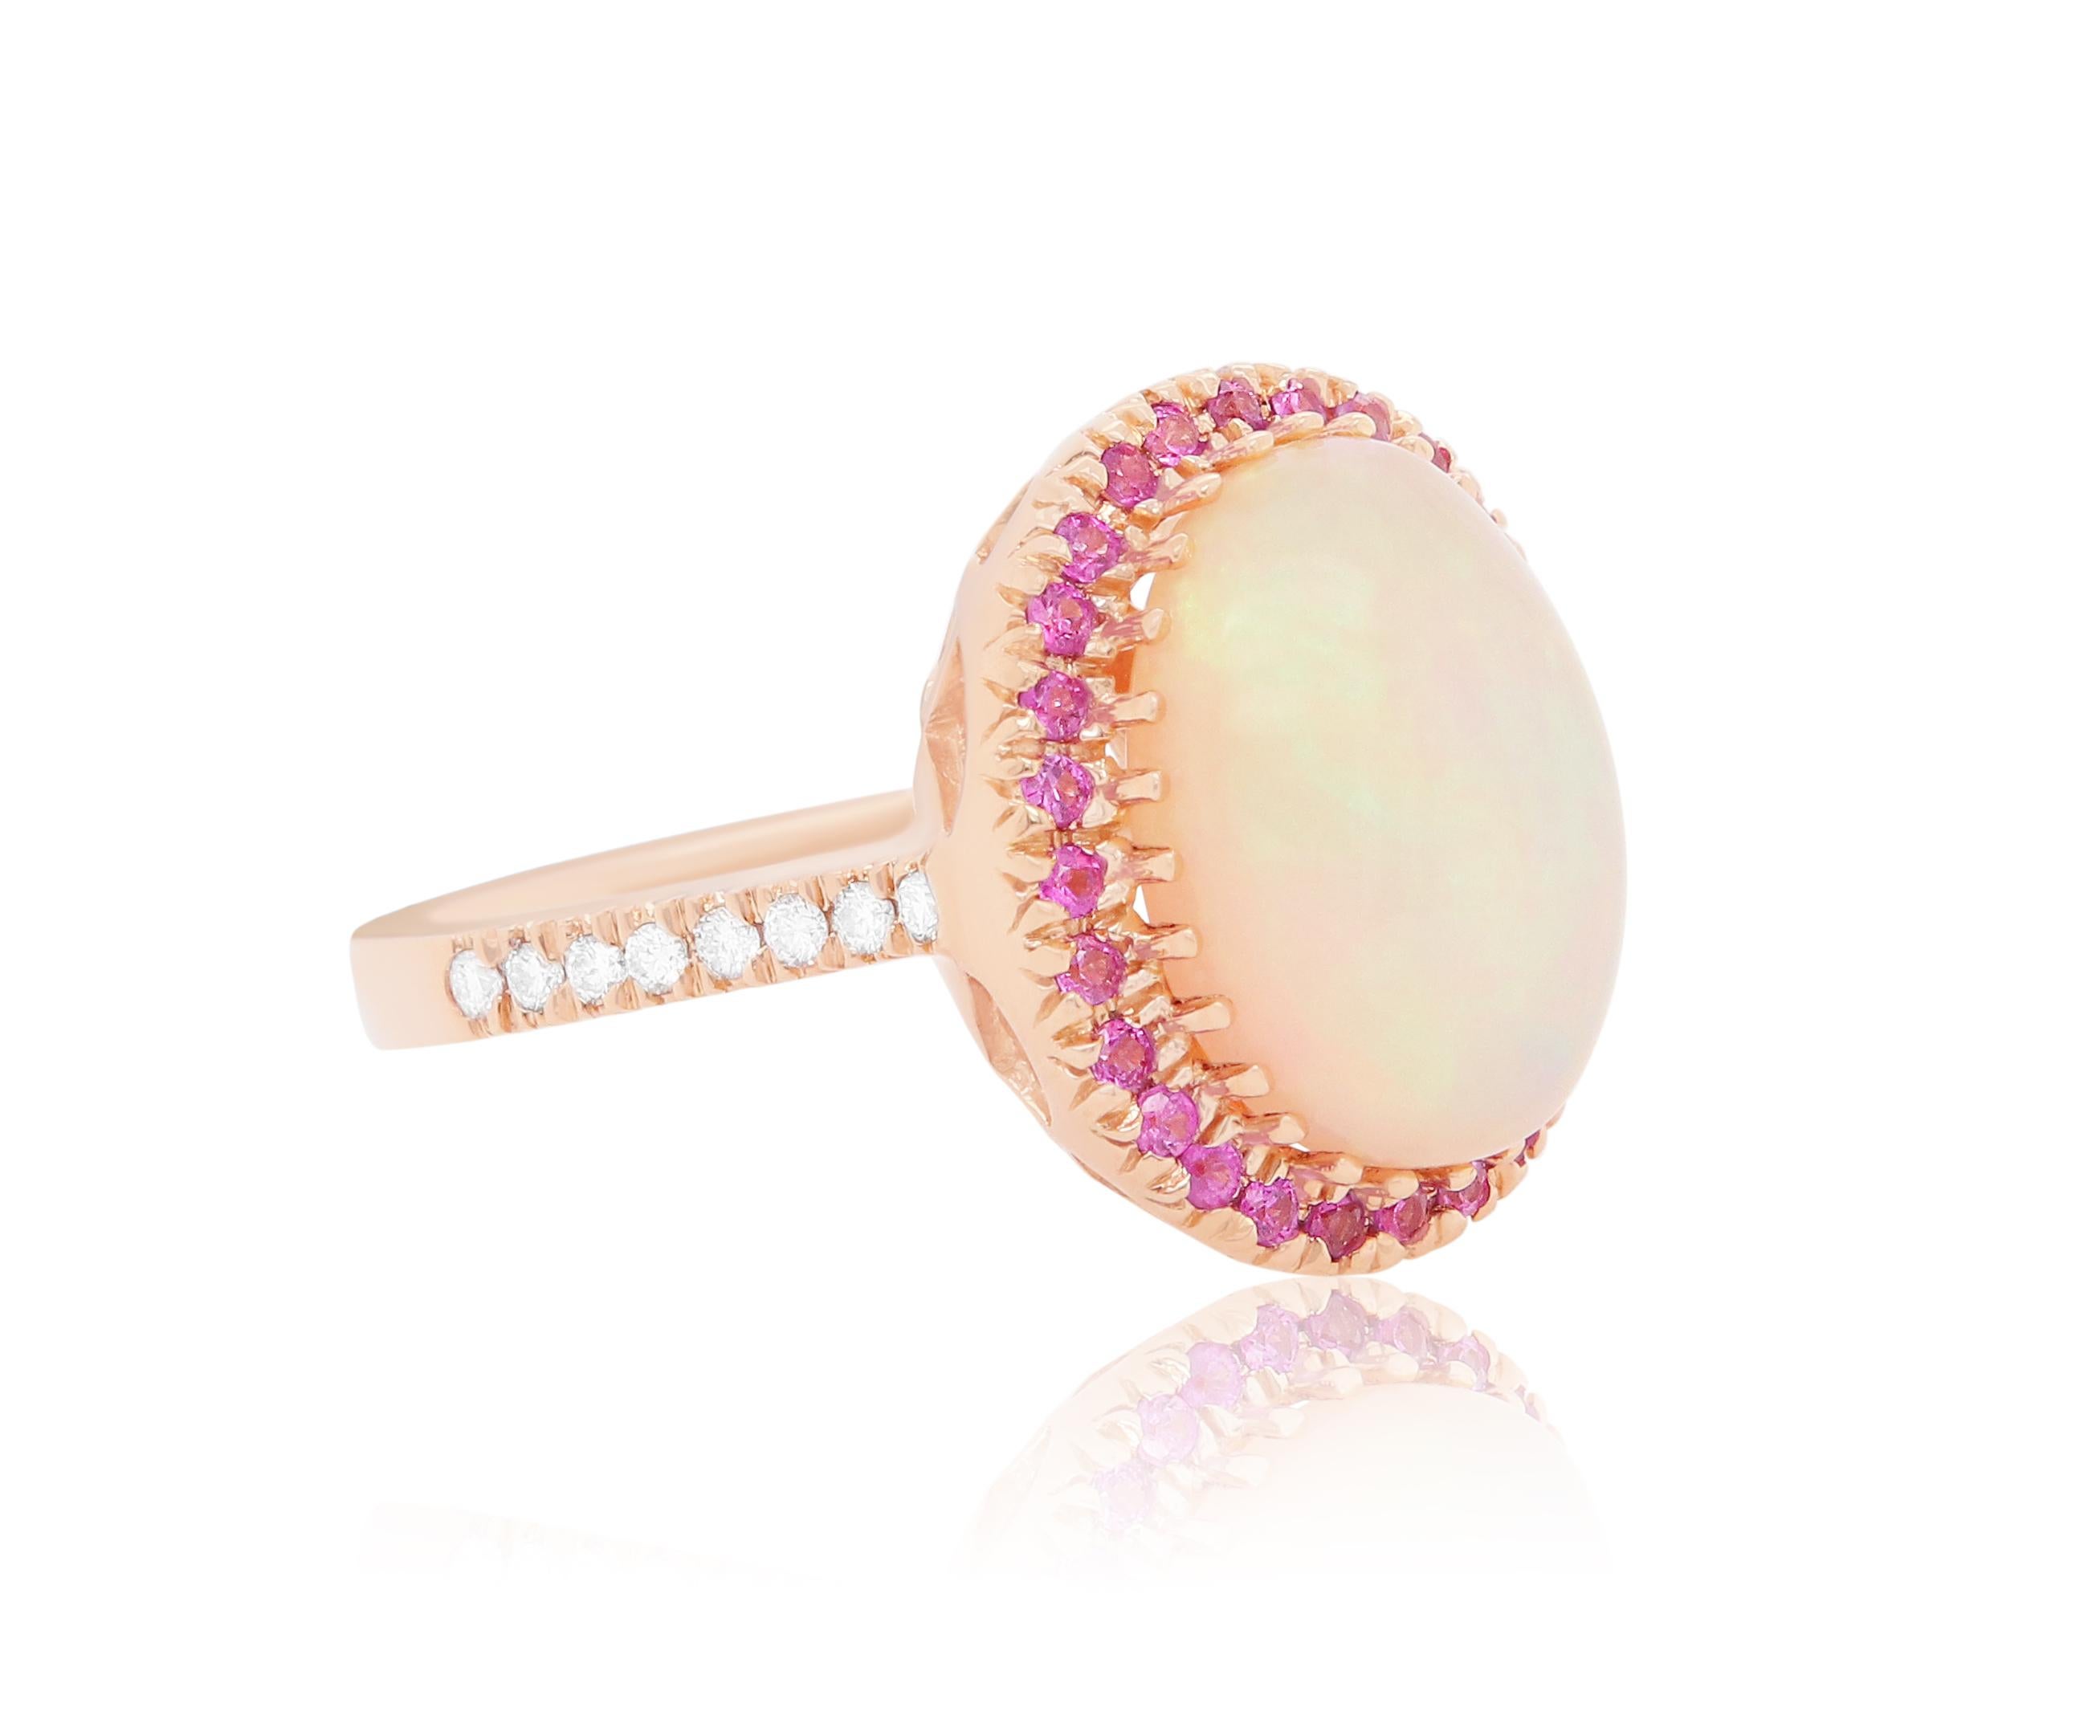 Material: 14k Yellow Gold 
Center Stone Detail:  1 Oval Opal at 6.13 Carats - Measuring 15.4 x 11.7 mm
Mounting Stone Details:  28 Round Pink Sapphires at 0.45 Carats
Diamond Details: 16 Brilliant Round White Diamonds at 0.20 Carats - Clarity: SI /